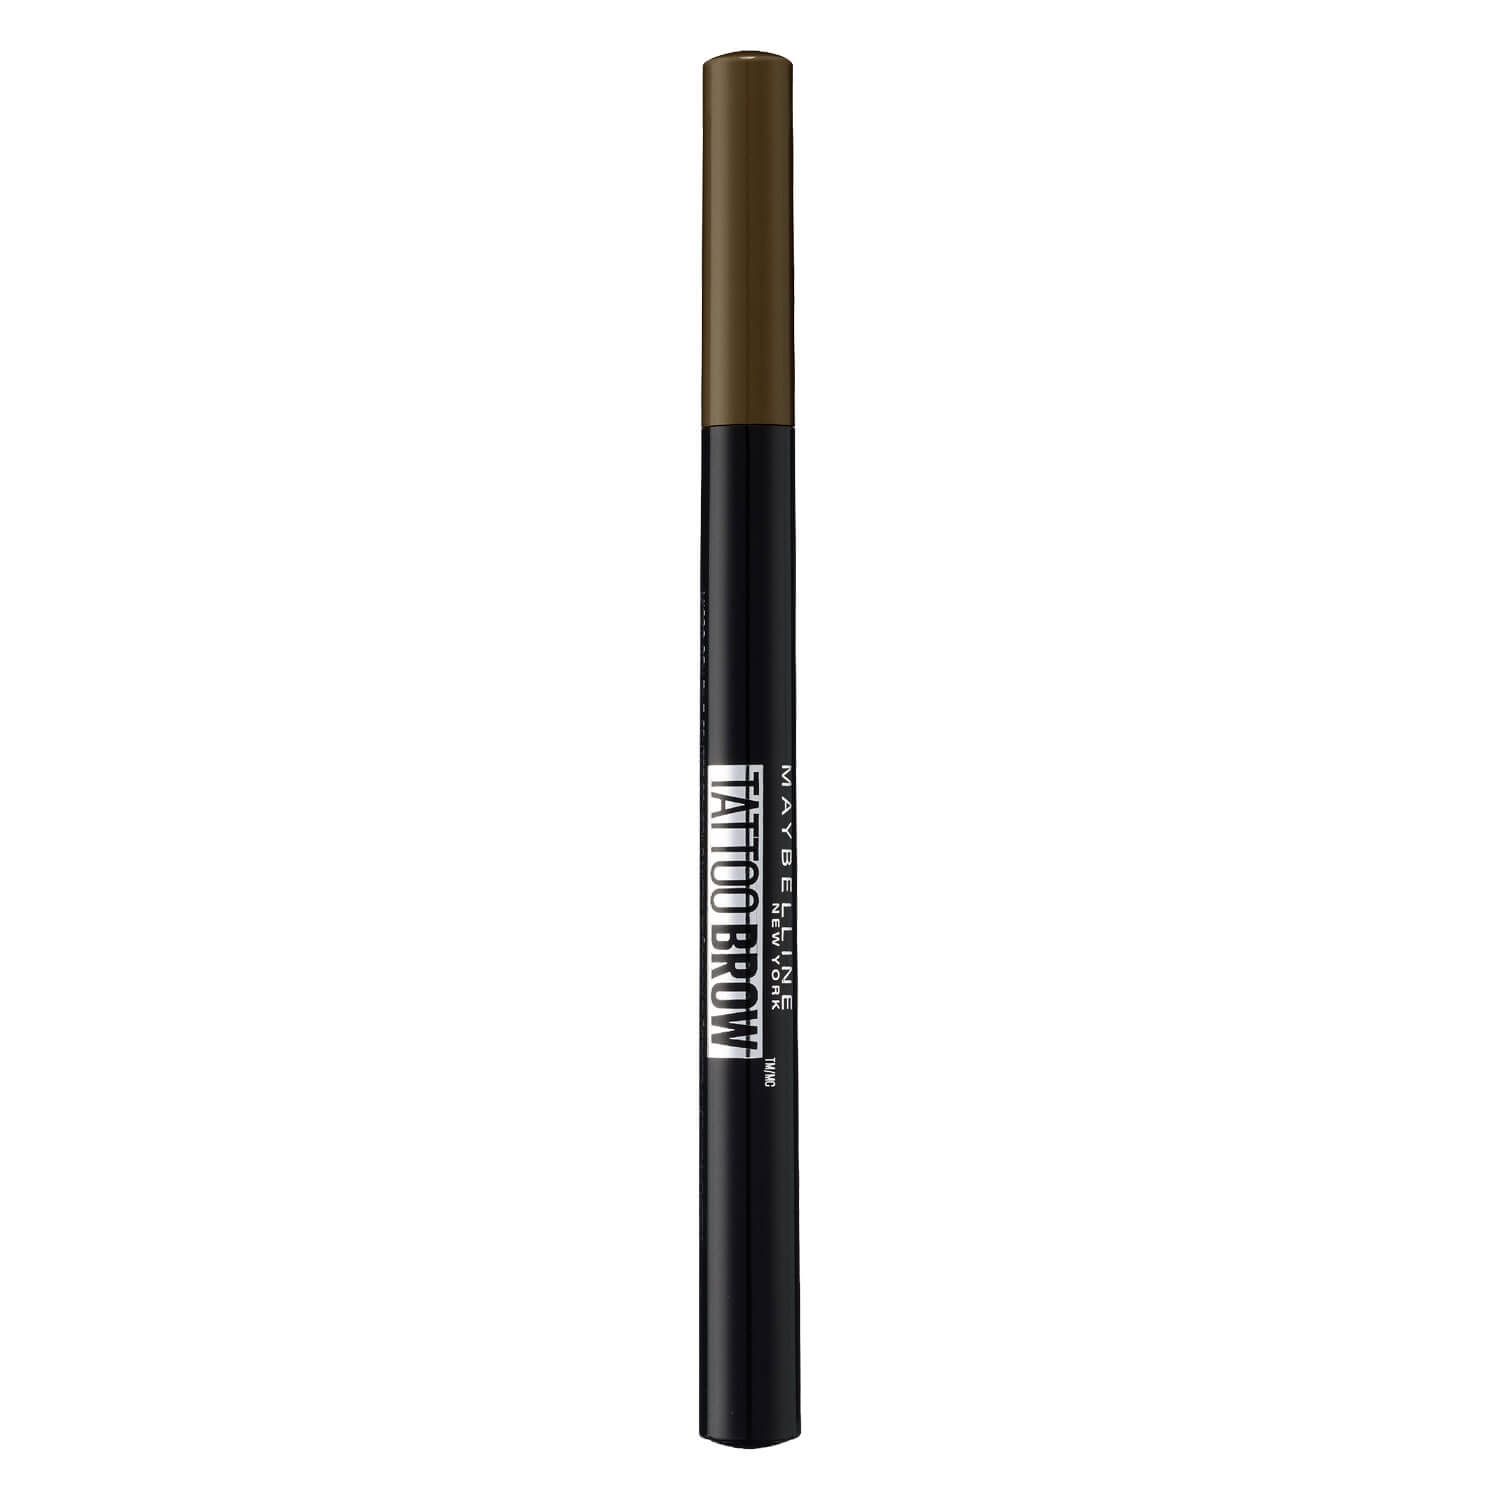 Product image from Maybelline NY Brows - Tattoo Brow Augenbrauenstift Nr. 130 Deep Brown